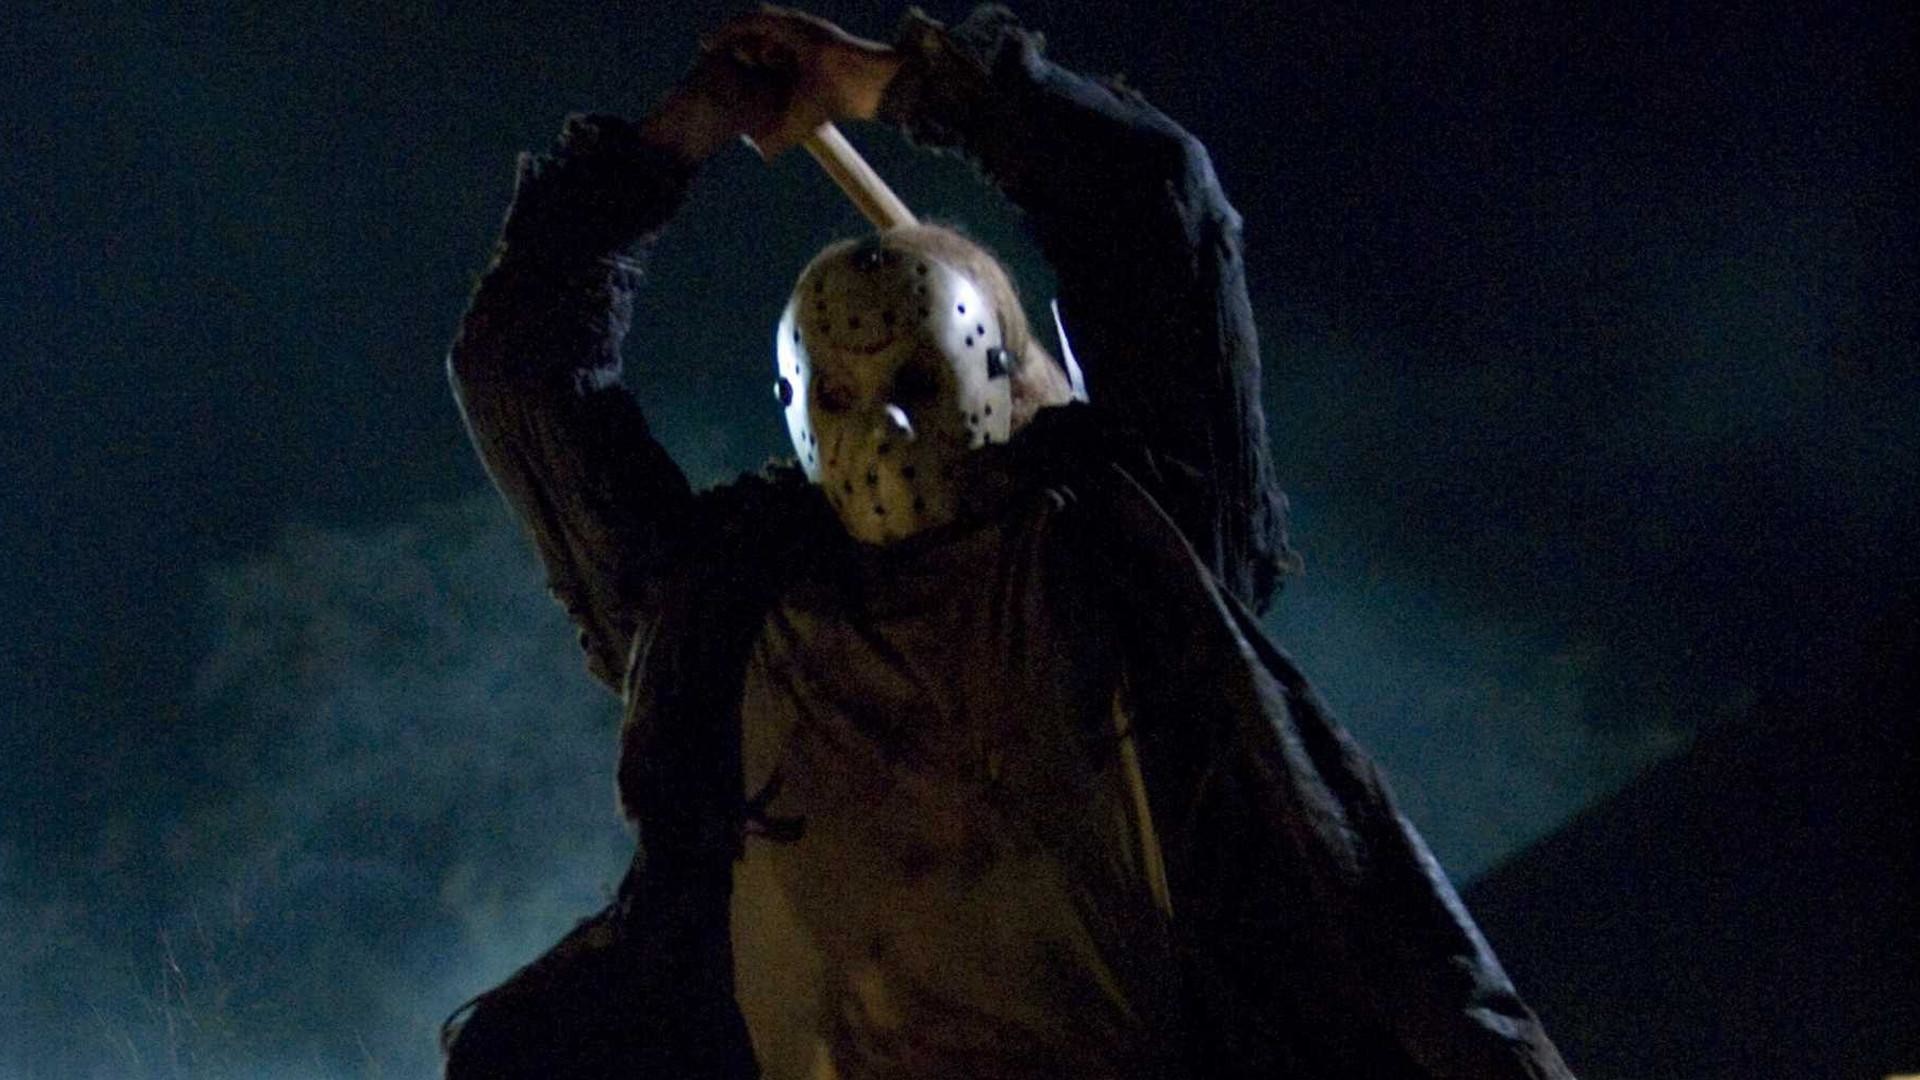 DOUBLE TAKE – FRIDAY THE 13TH (1980) / FRIDAY THE 13TH (2009 .